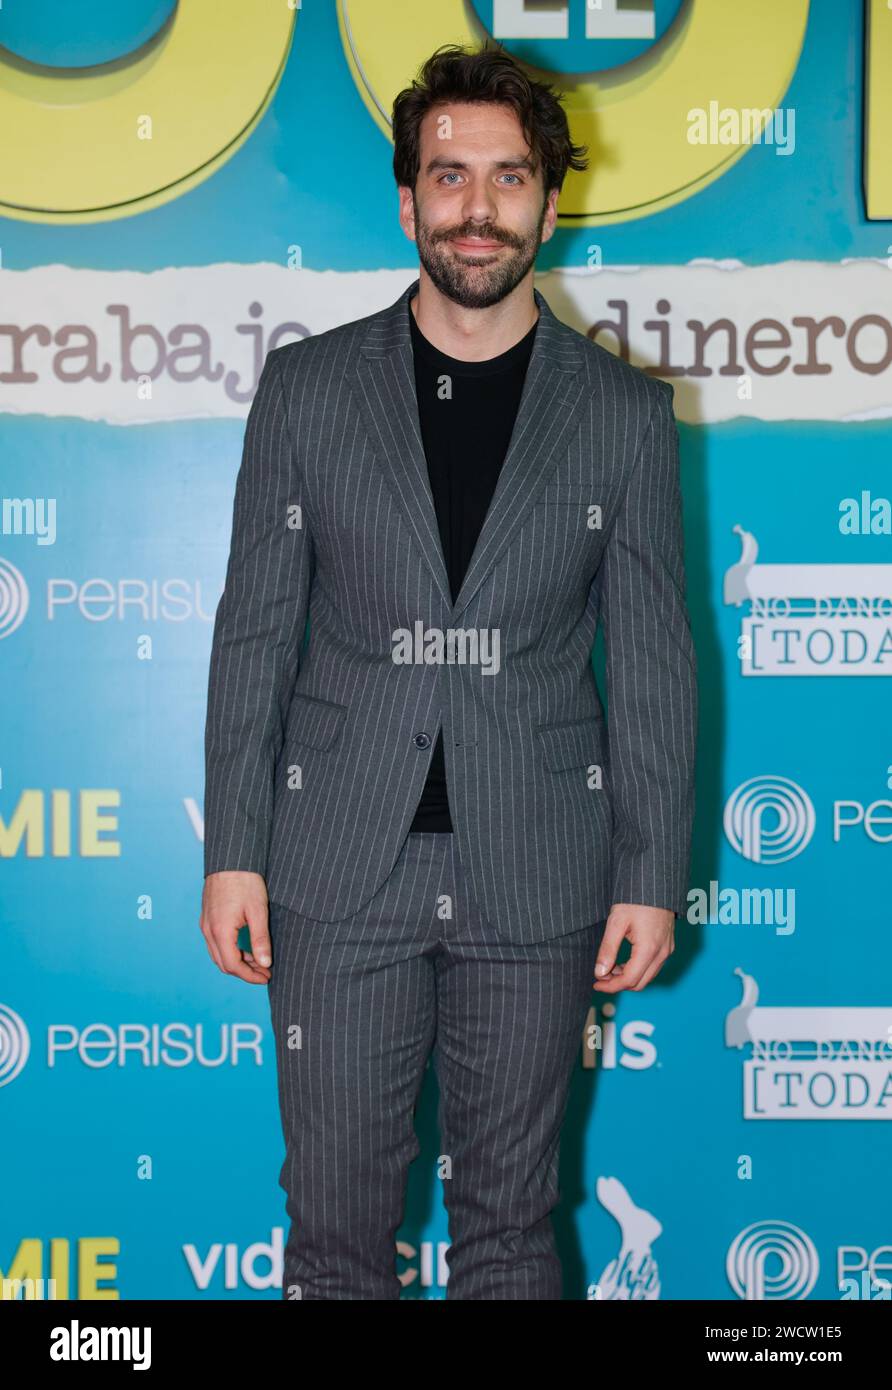 Mexico City, Mexico. 16th Jan, 2024. Giuseppe Gamba is attending the red carpet of the Roomie film premiere at Cinepolis Perisur in Mexico City, Mexico, on January 16, 2024. (Photo by Luis Marin/Eyepix Group) Credit: NurPhoto SRL/Alamy Live News Stock Photo